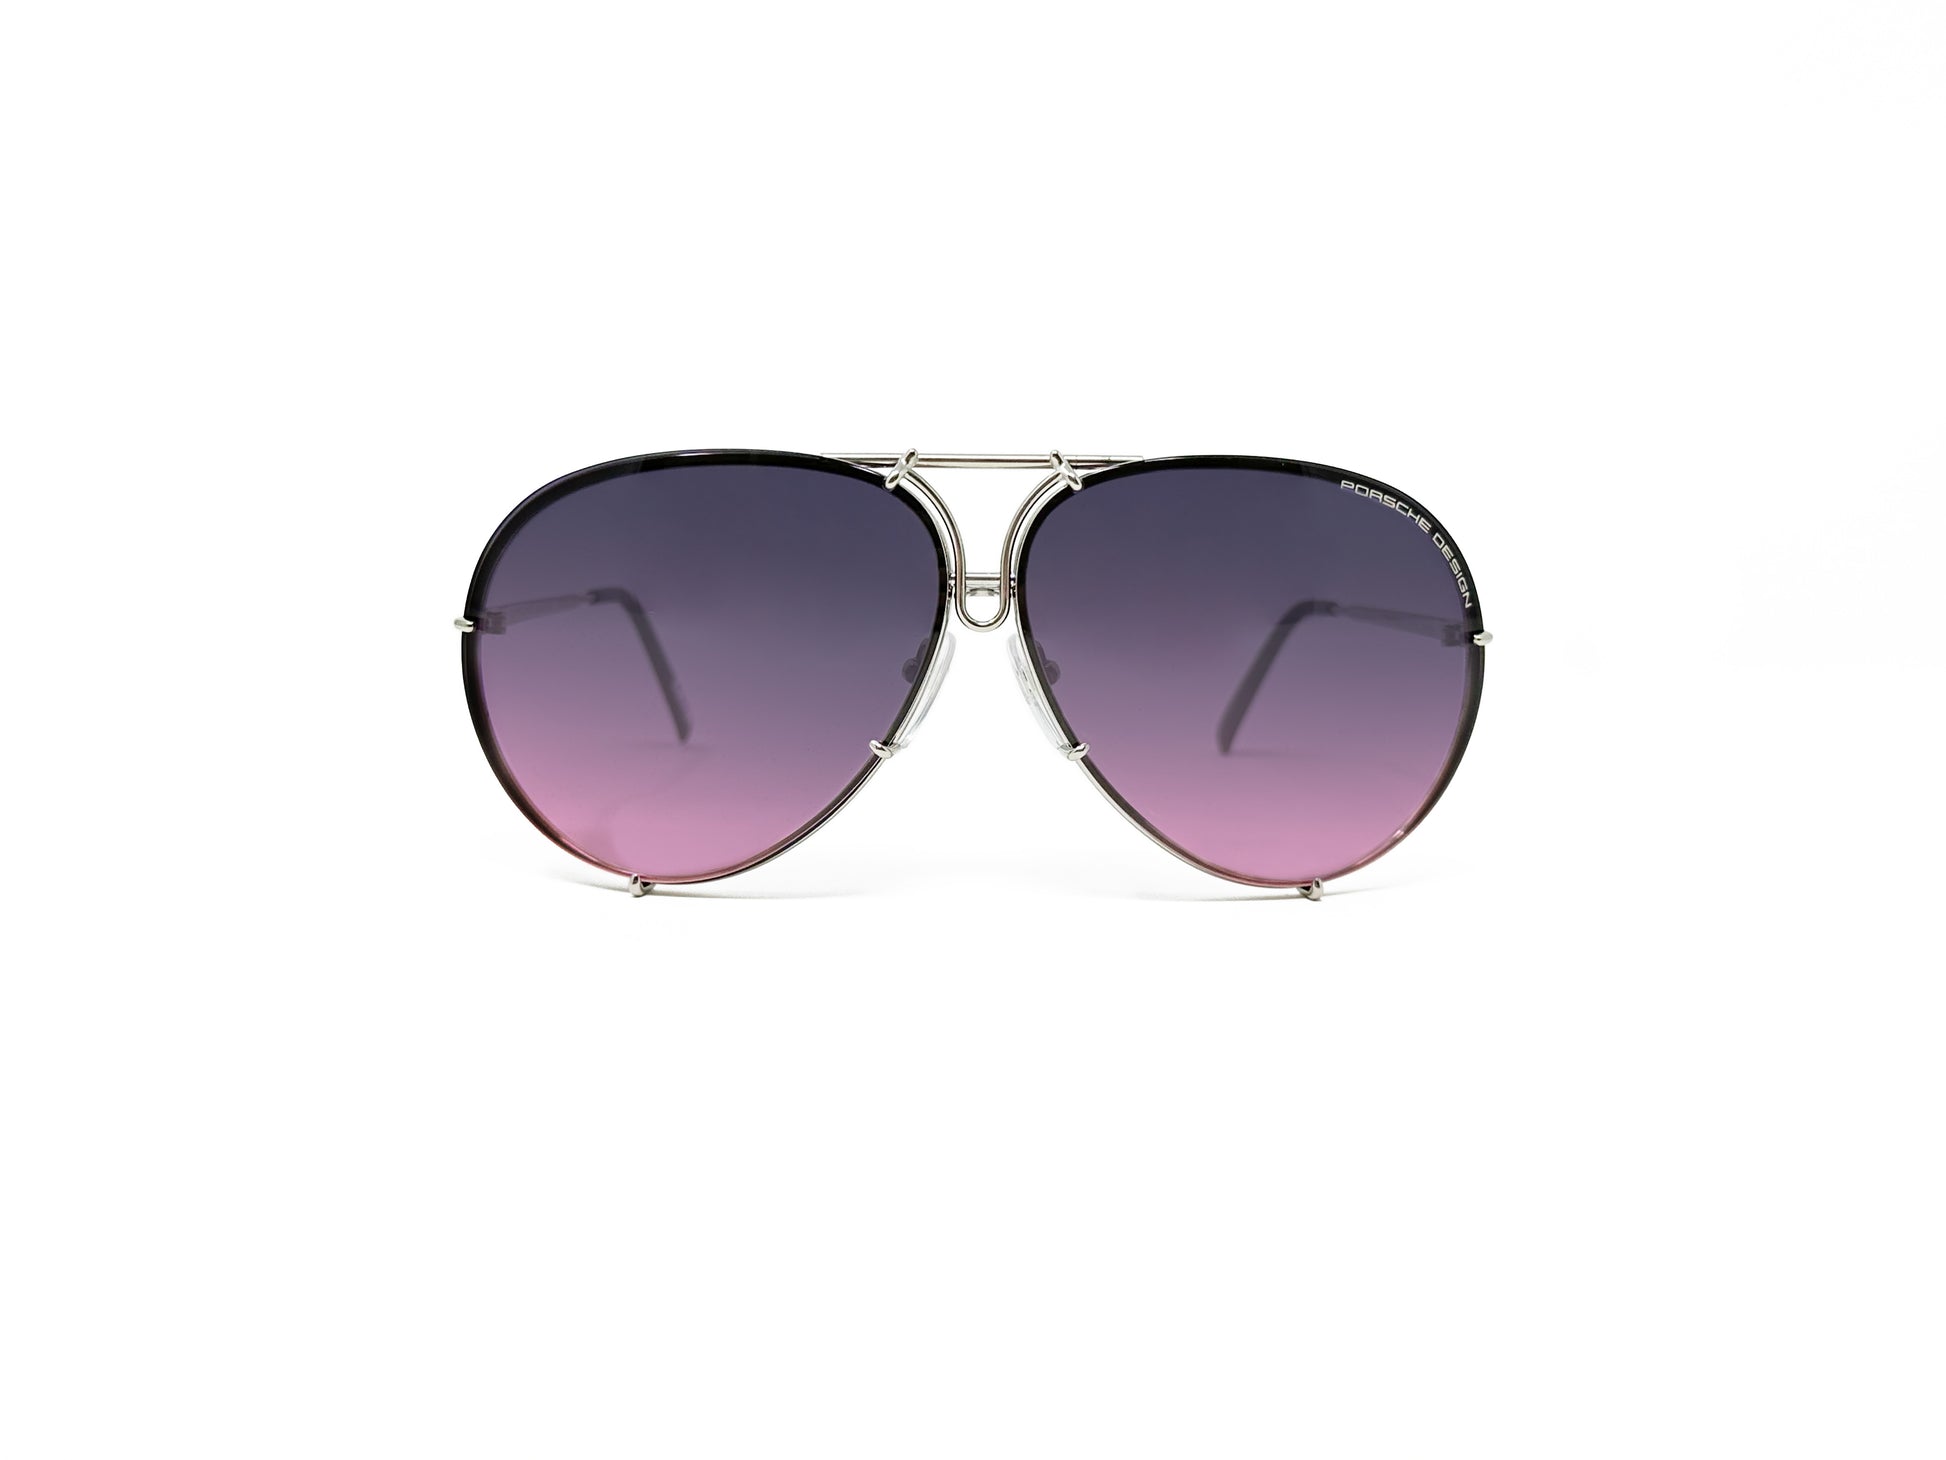 Porsche Design aviator style sunglass. Model: P8478. Color M Silver with purple to pink gradient lens. Front view.